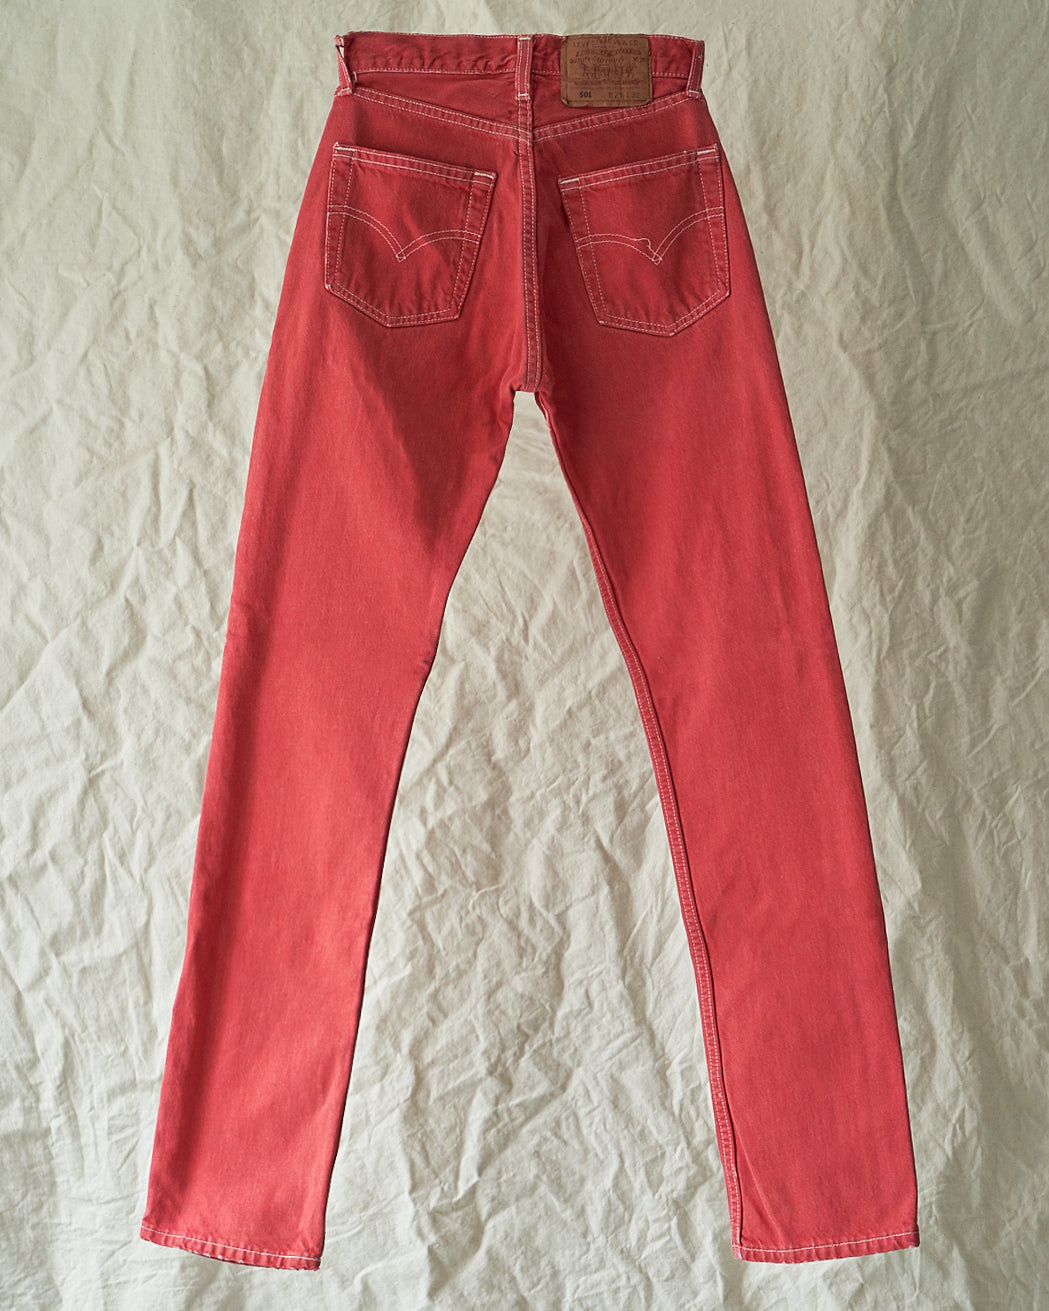 Levi's 501 Red - 25